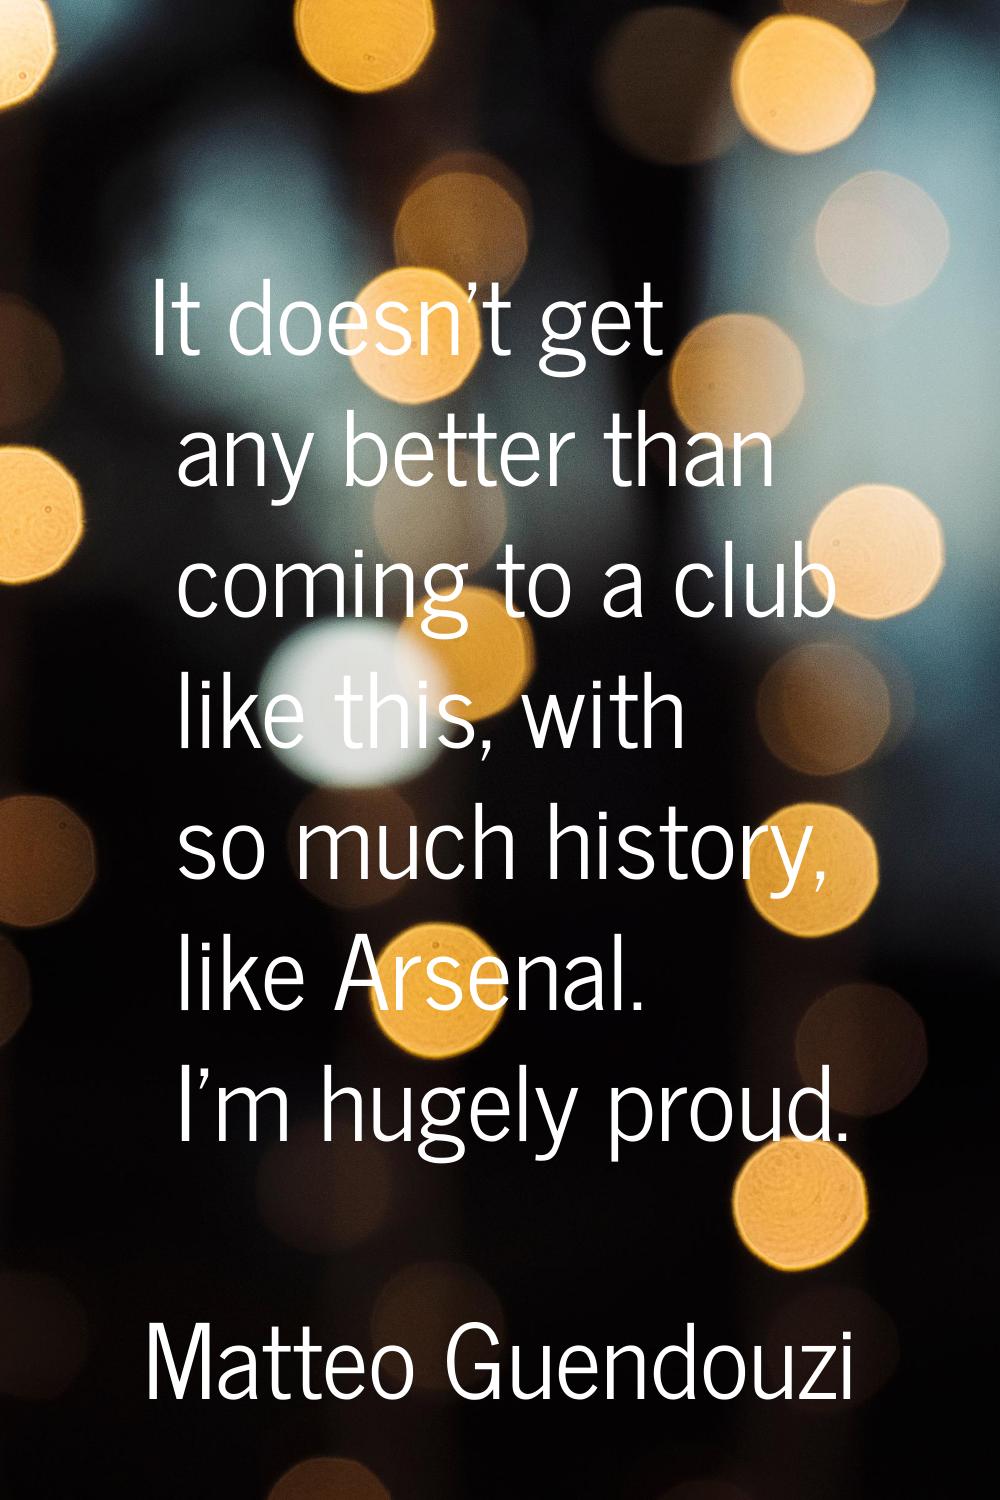 It doesn't get any better than coming to a club like this, with so much history, like Arsenal. I'm 